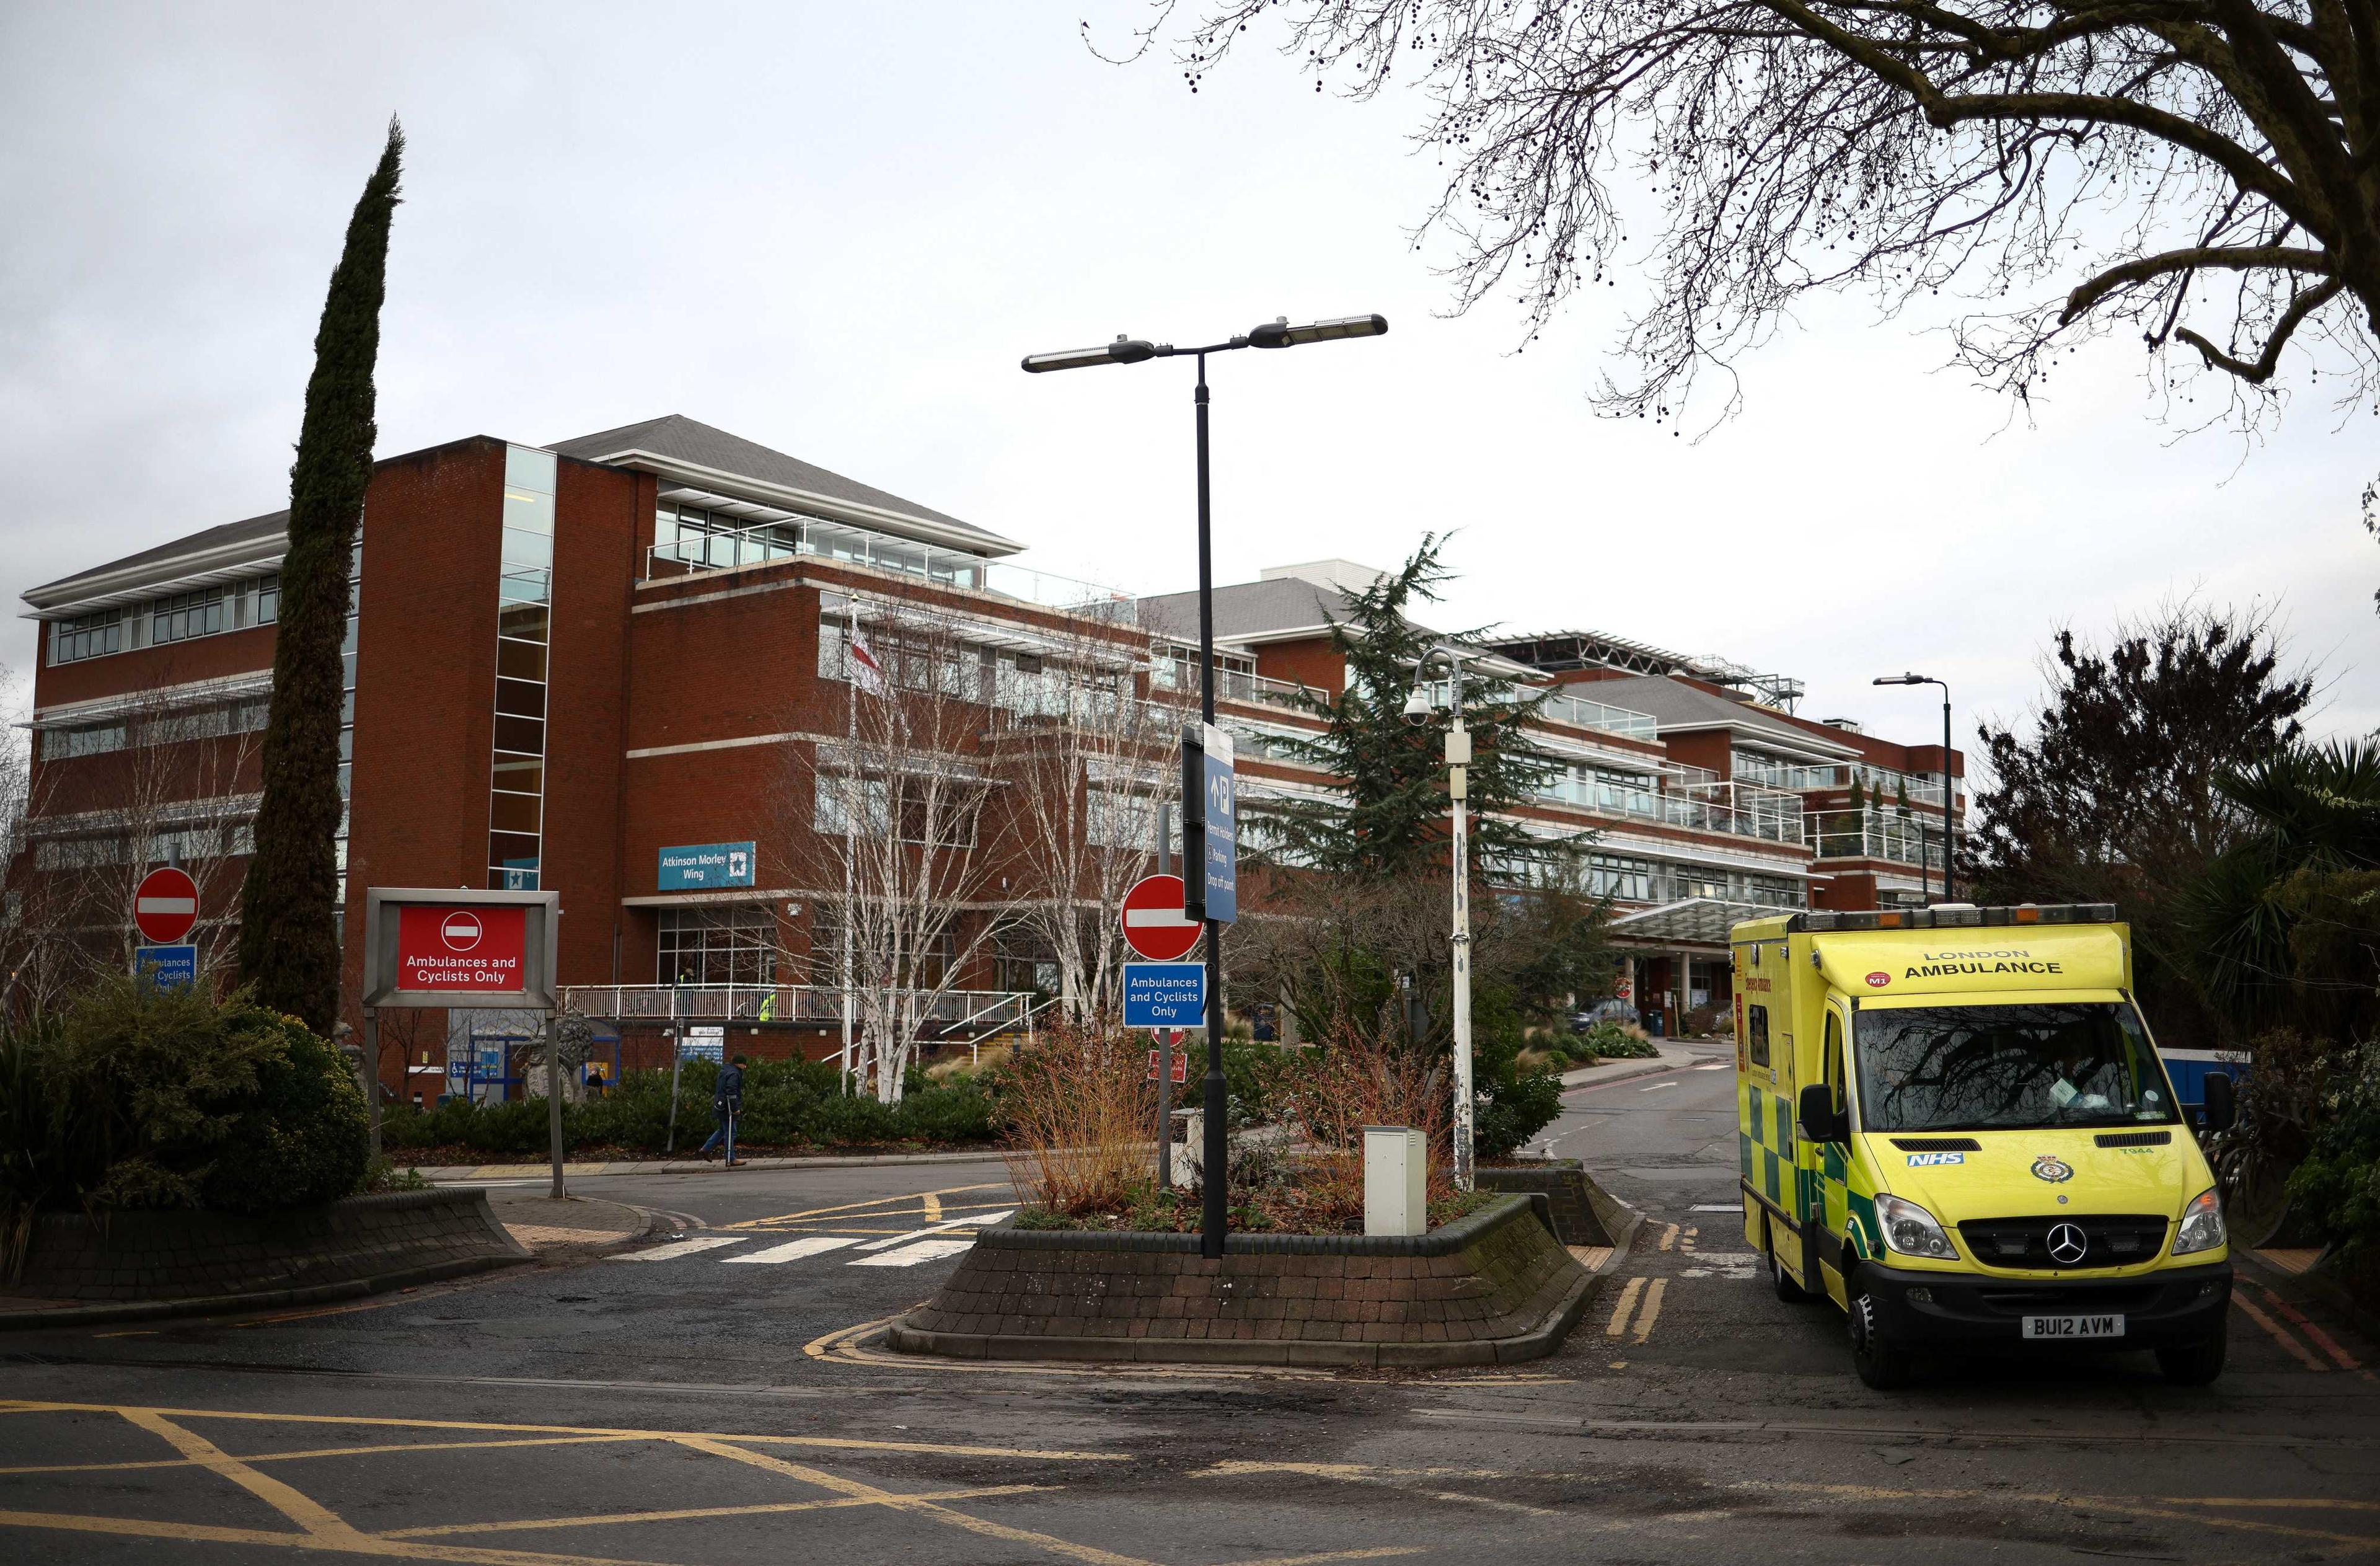 An ambulance leaves St George’s University Hospital, which has declared a critical incident due to bed shortages, in London, Britain, Jan 5. Photo: Reuters